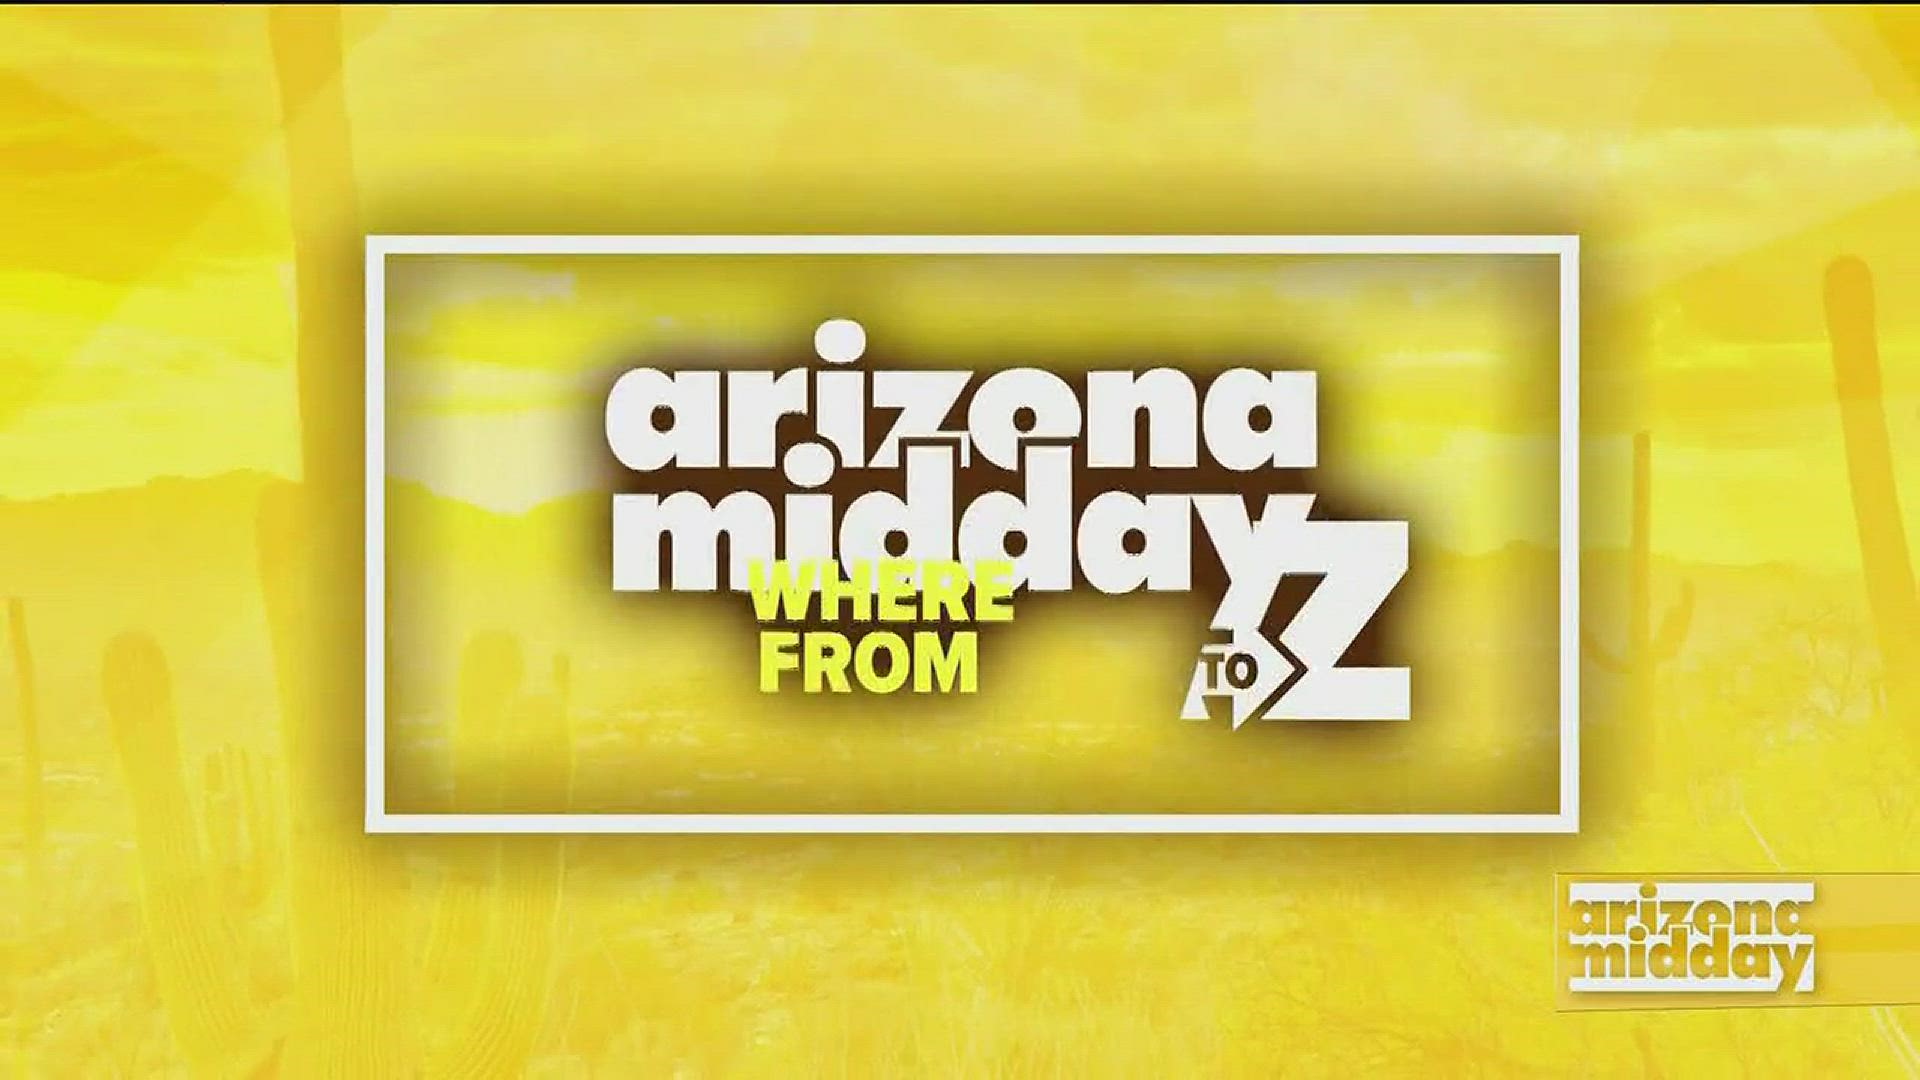 Dr. Alan Mafara gives us a look at some of the best pet care available in Gilbert.